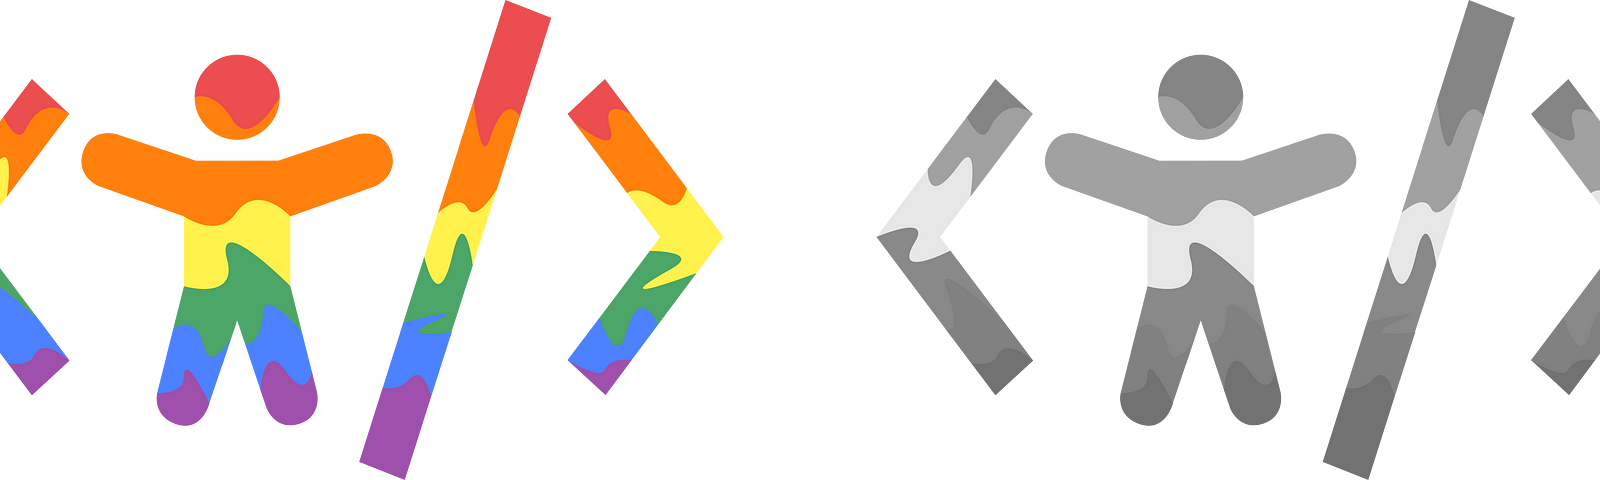 On the left, the Accessibility For Devs logo in color, with the 6 colors of neurodiversity, and on the right, the same logo in grayscale.